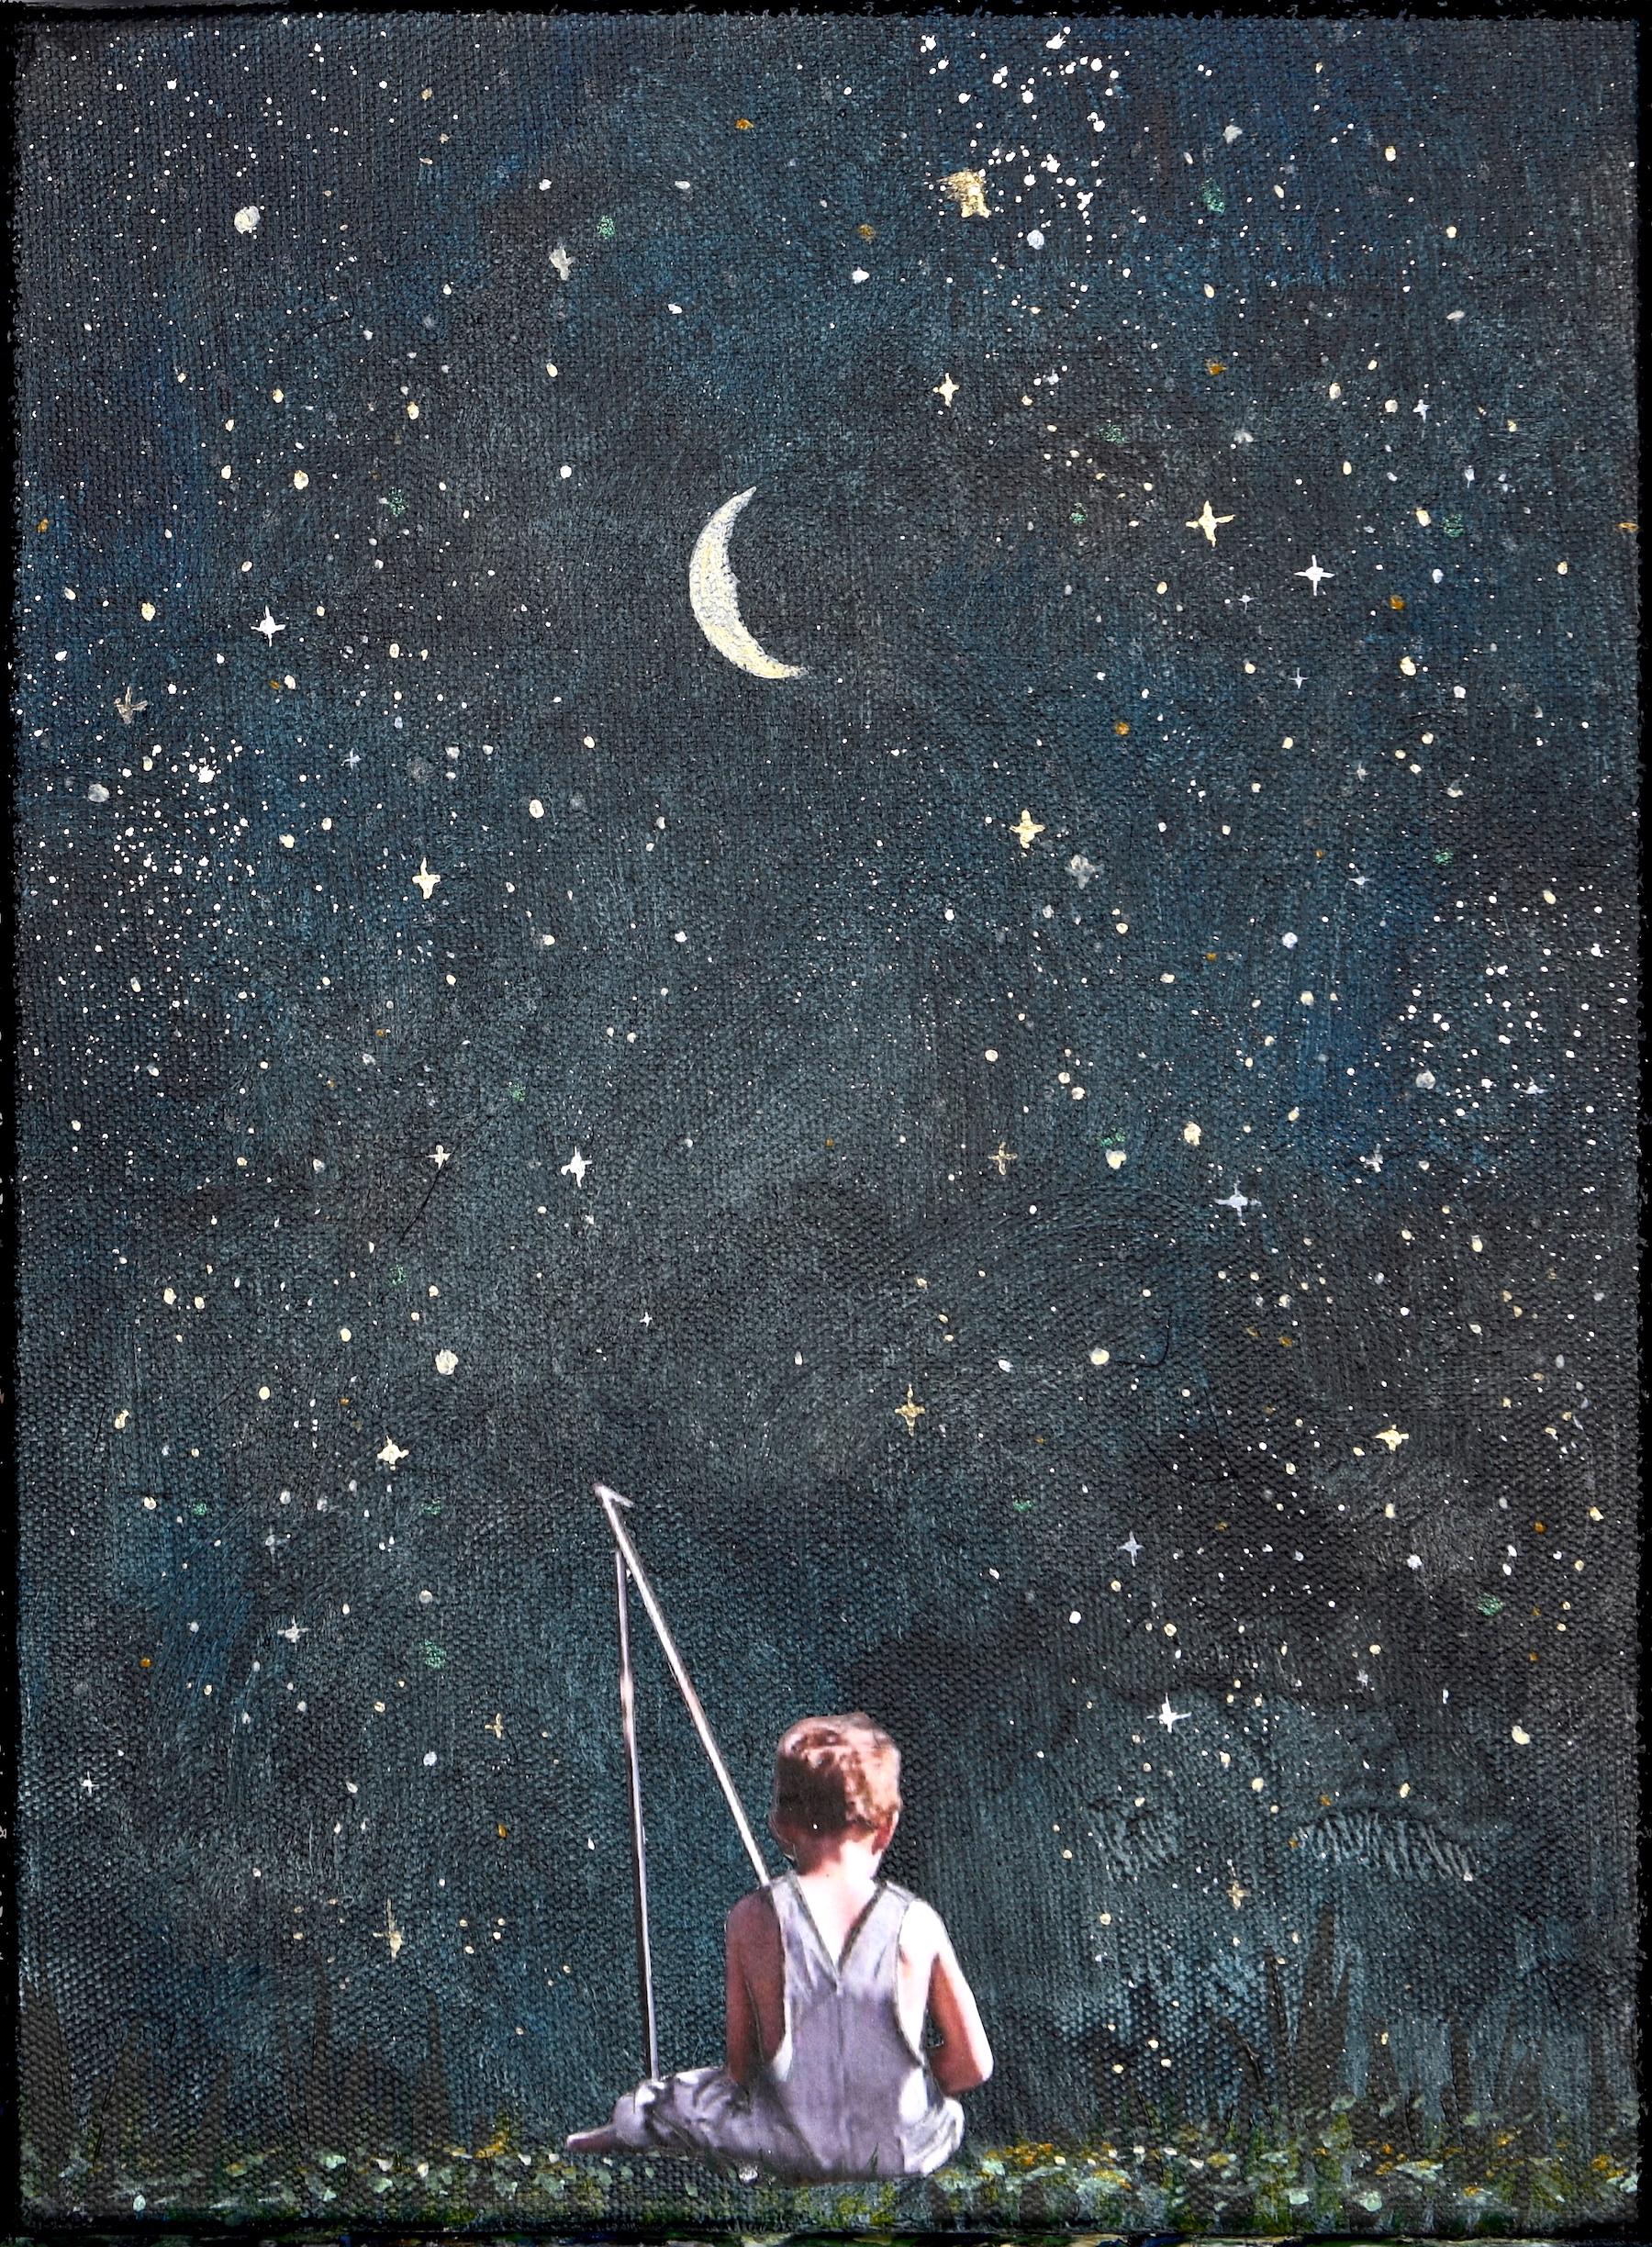 https://a.1stdibscdn.com/veronica-green-paintings-my-shining-star-little-boy-fishing-under-the-moon-and-stars-glow-in-the-dark-for-sale/a_15182/a_86701421629423214570/VRG_Veronica_Green_My_shining_star_Mixed_Media_and_Phosphorescent_30x22_5cms_USD1600_master.jpg